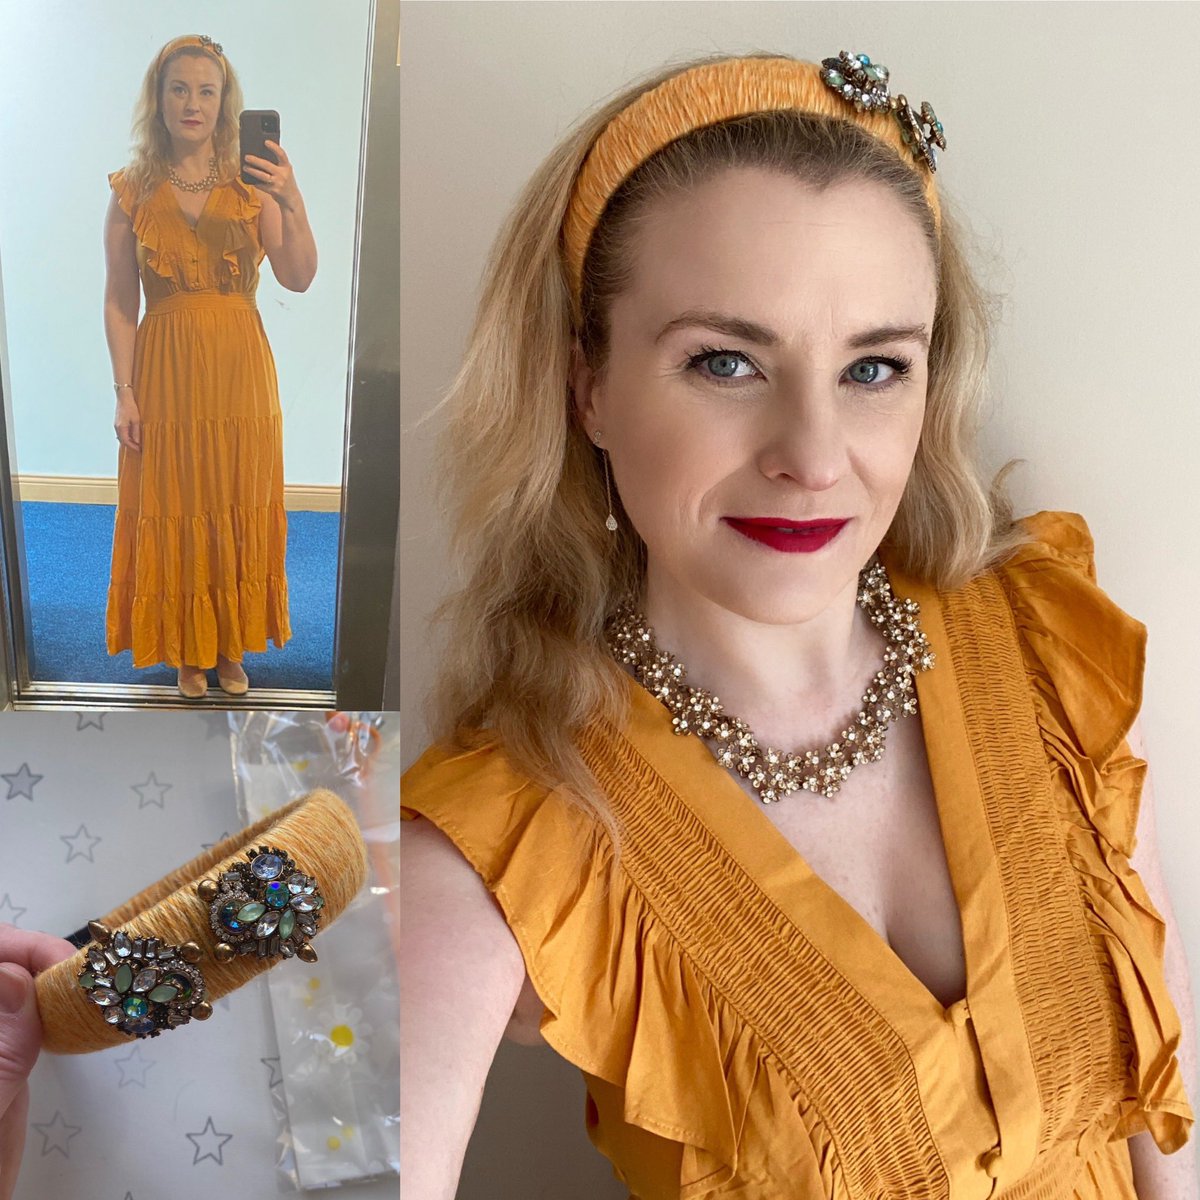 A golden girl for today’s #sundaystyle in a gorgeous maxi dress and the most stunning matching hairband from Daisies & Confetti and accessorized with gold jewelry and statement red lip #classicstyle #soprano